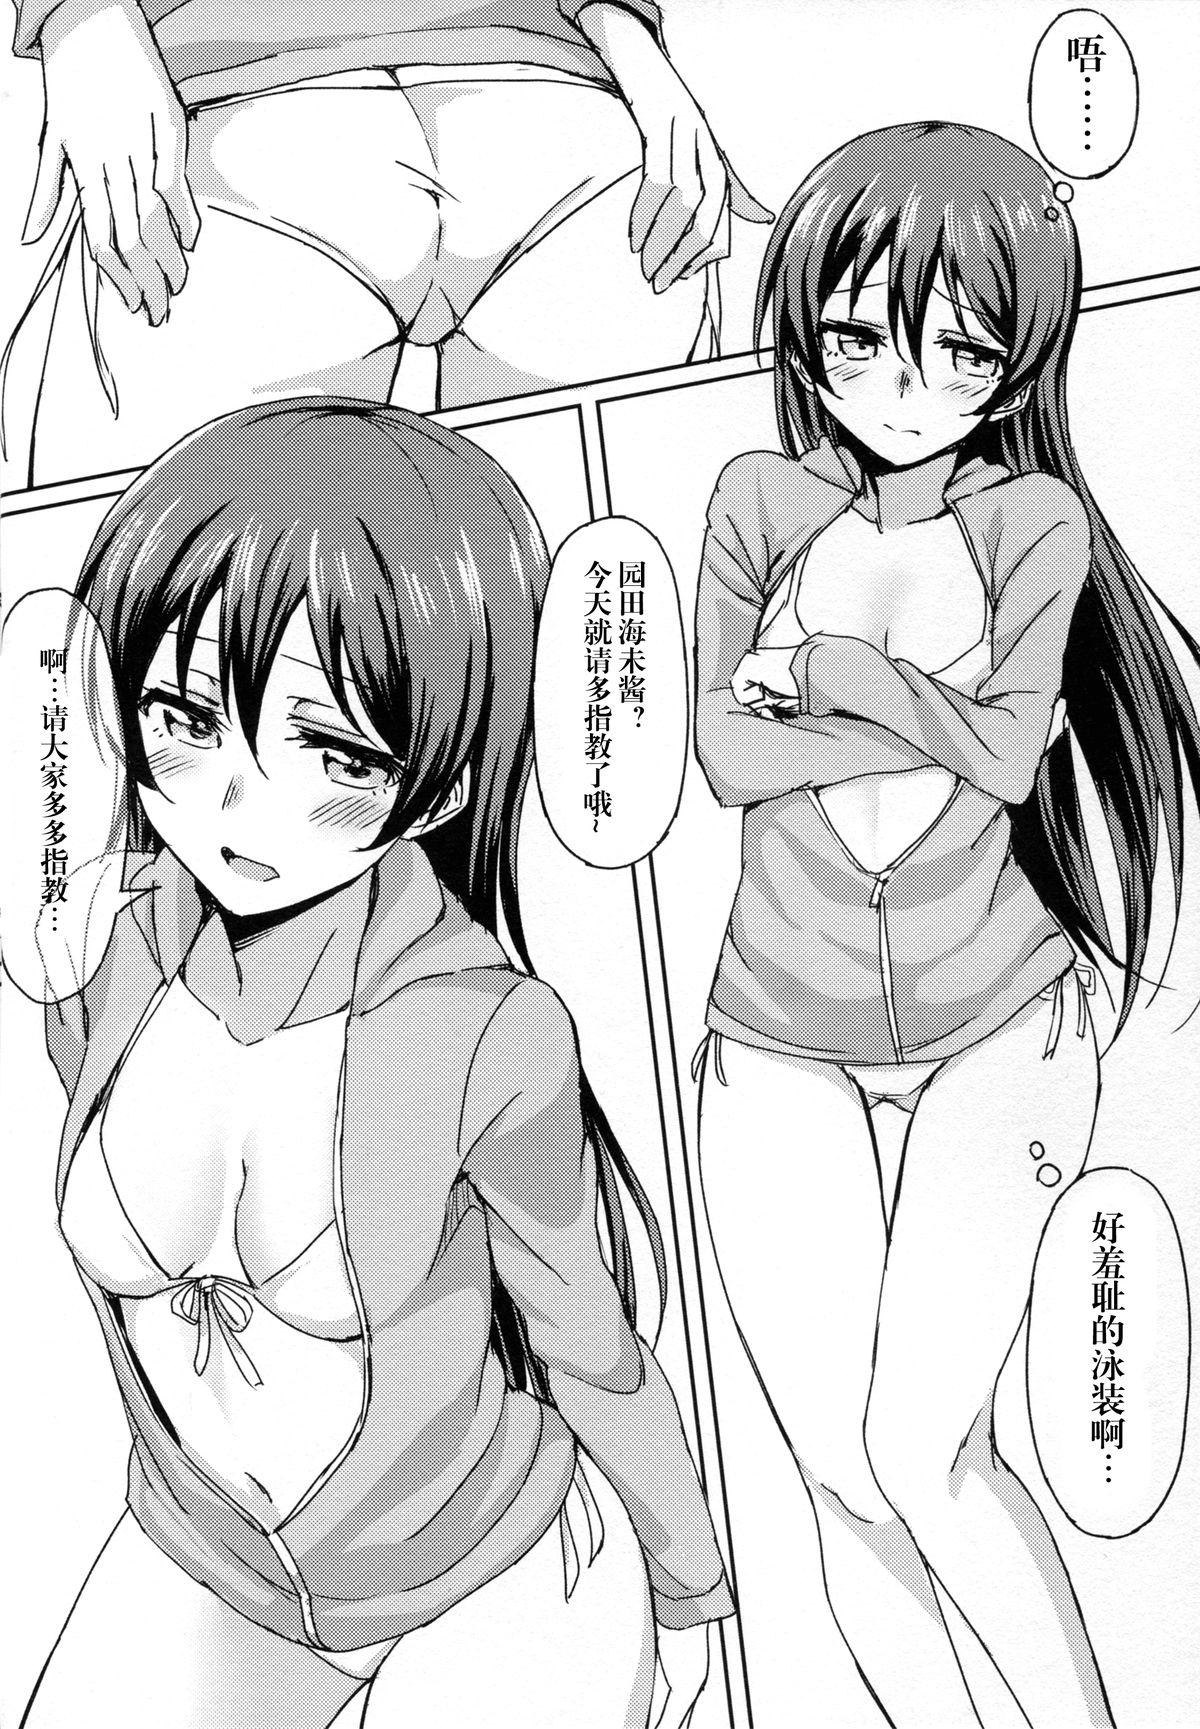 Babe Hah,Wrench This! - Love live Deflowered - Page 7